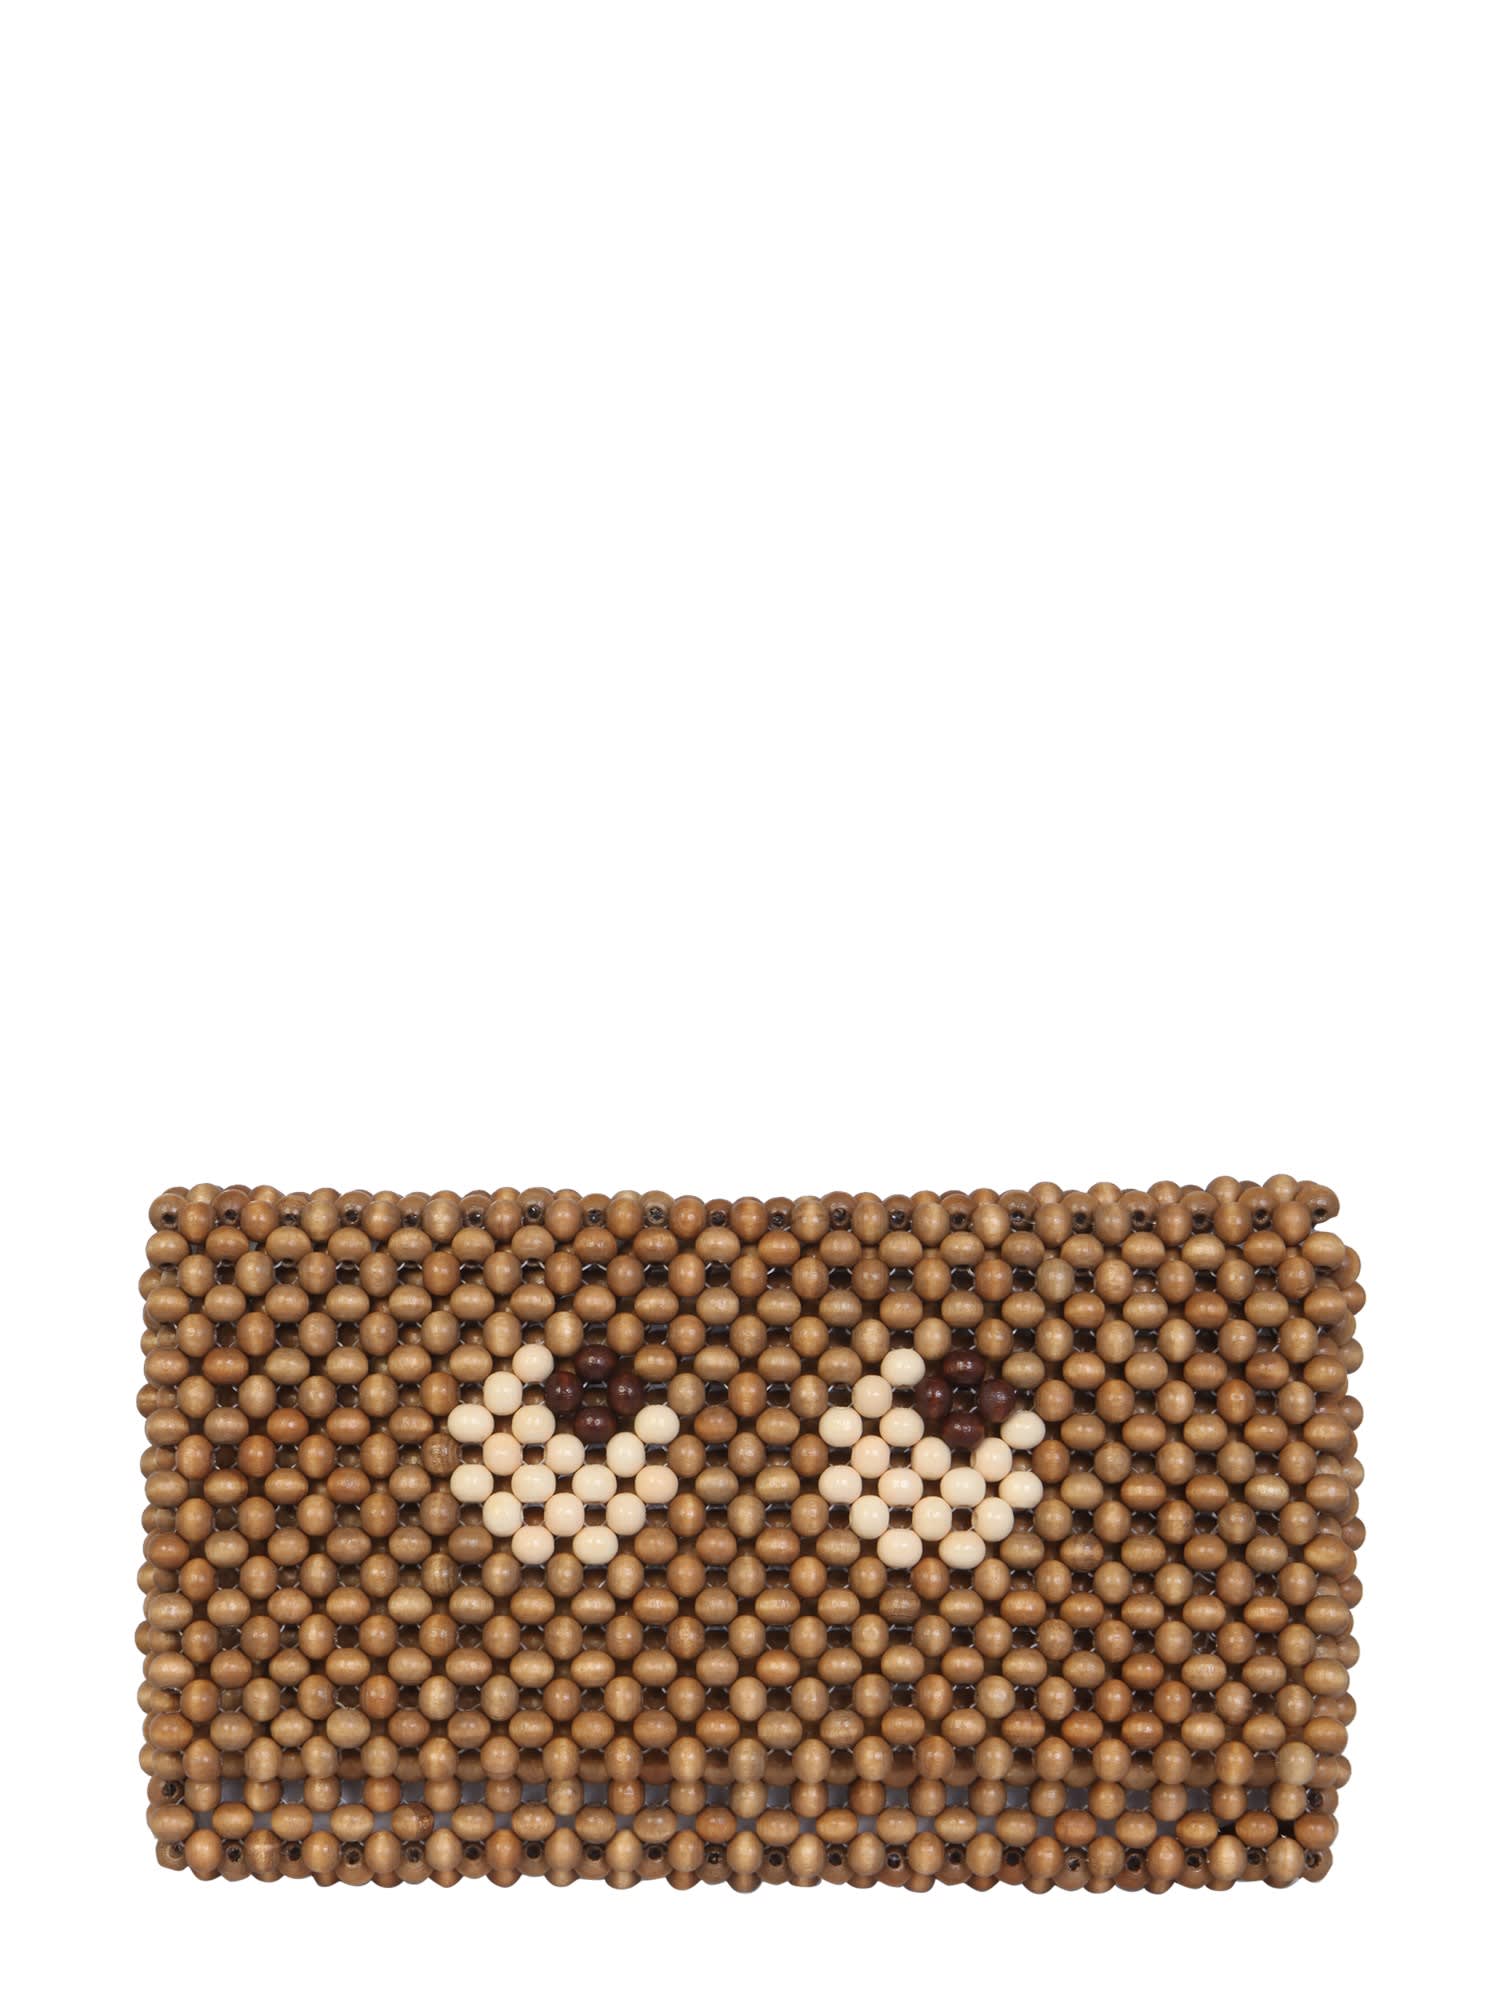 Anya Hindmarch Beads Eyes Pouch